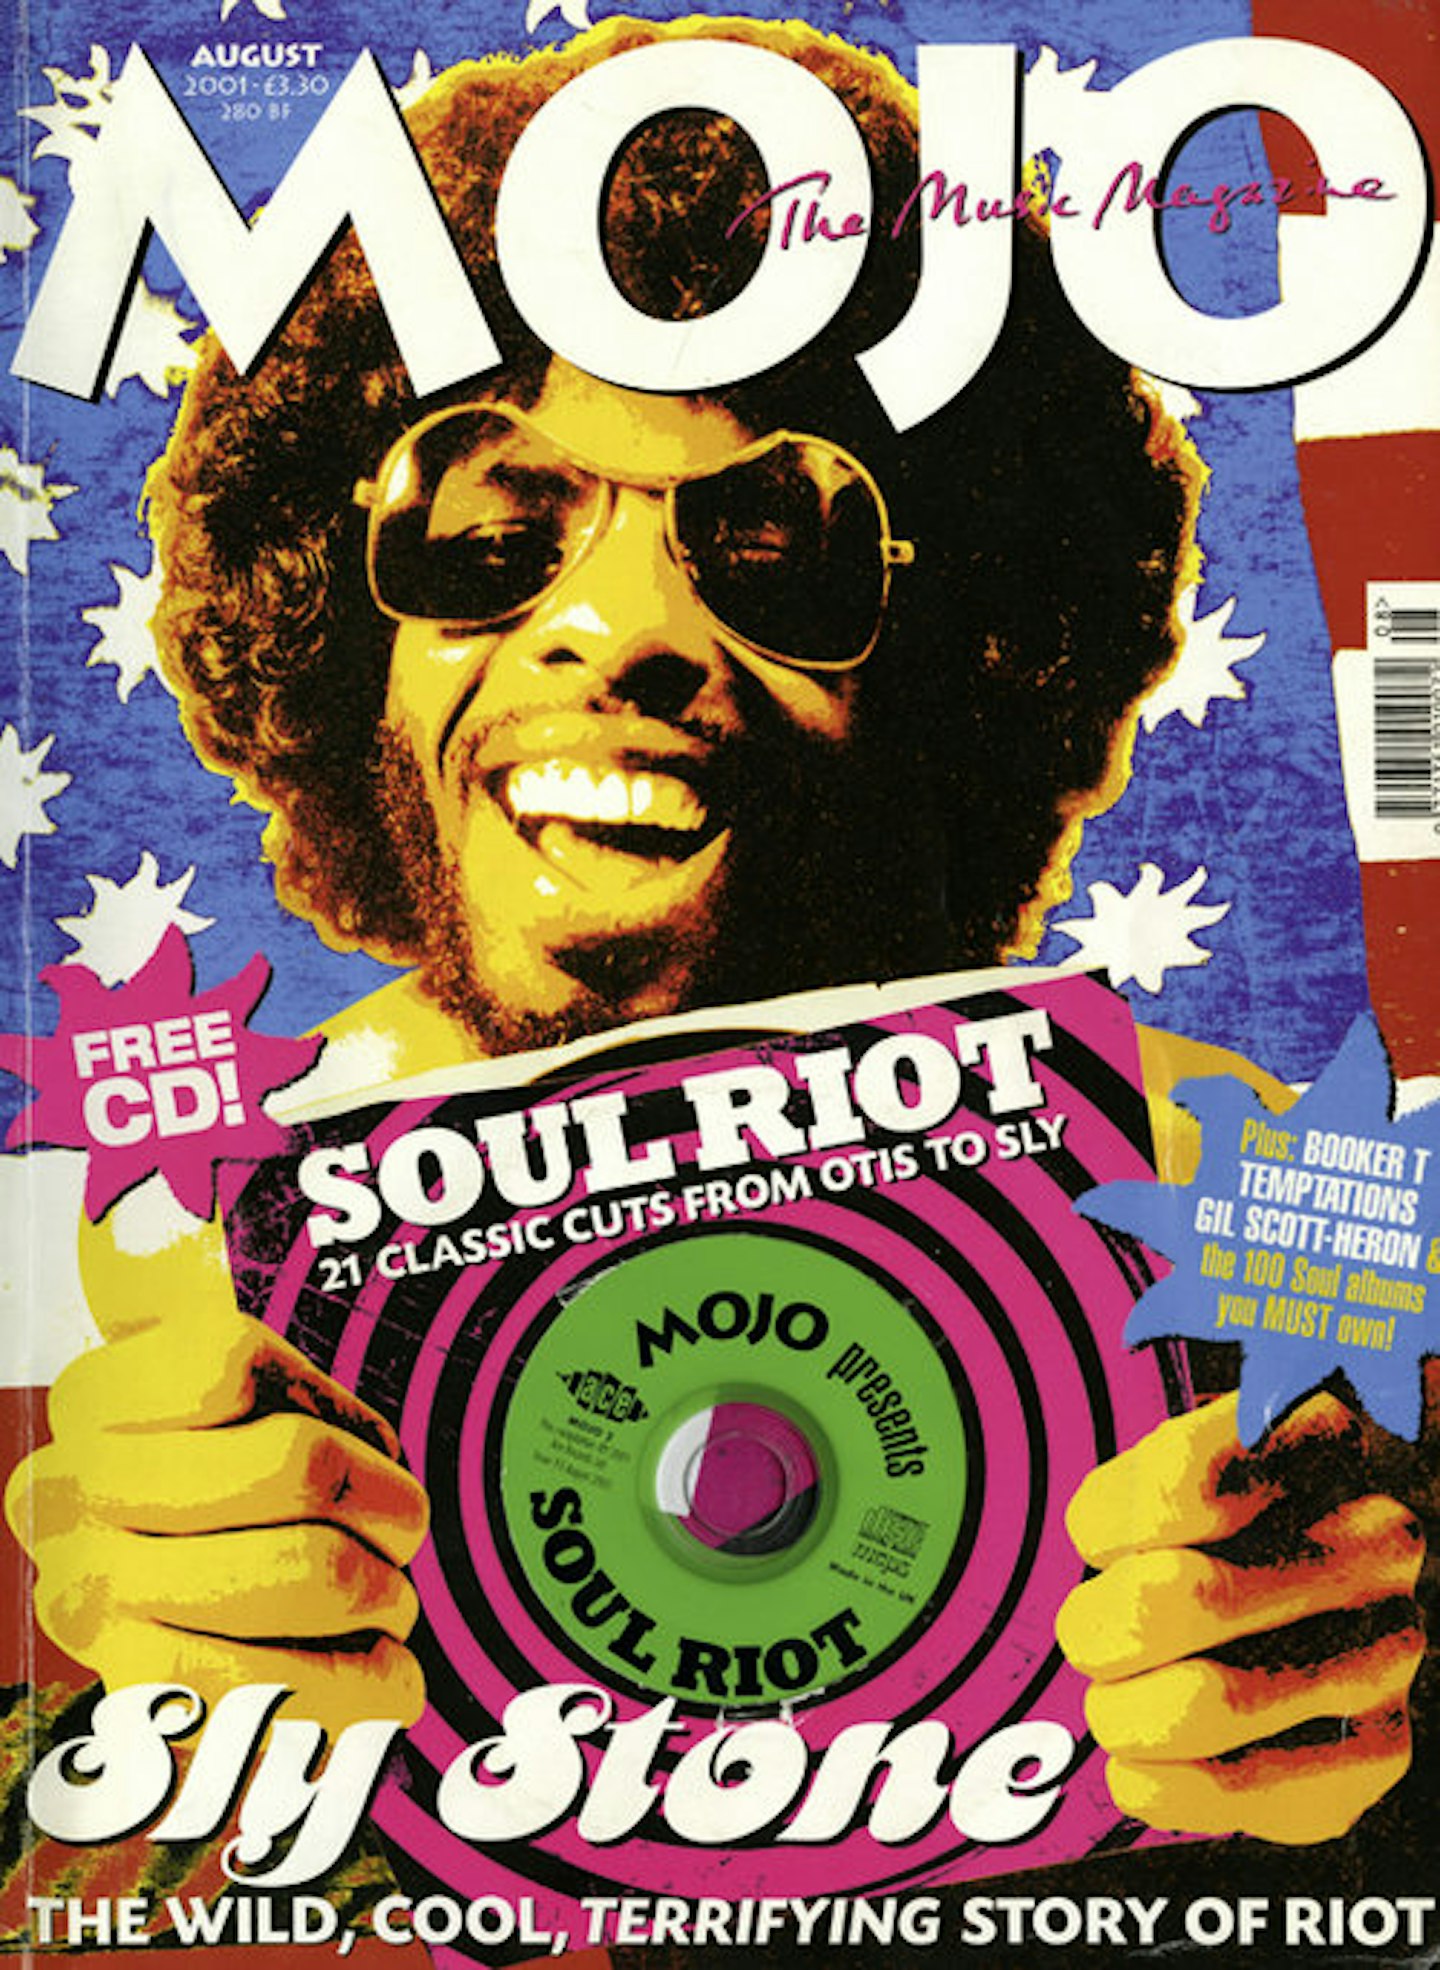 MOJO Issue 93 / August 2001